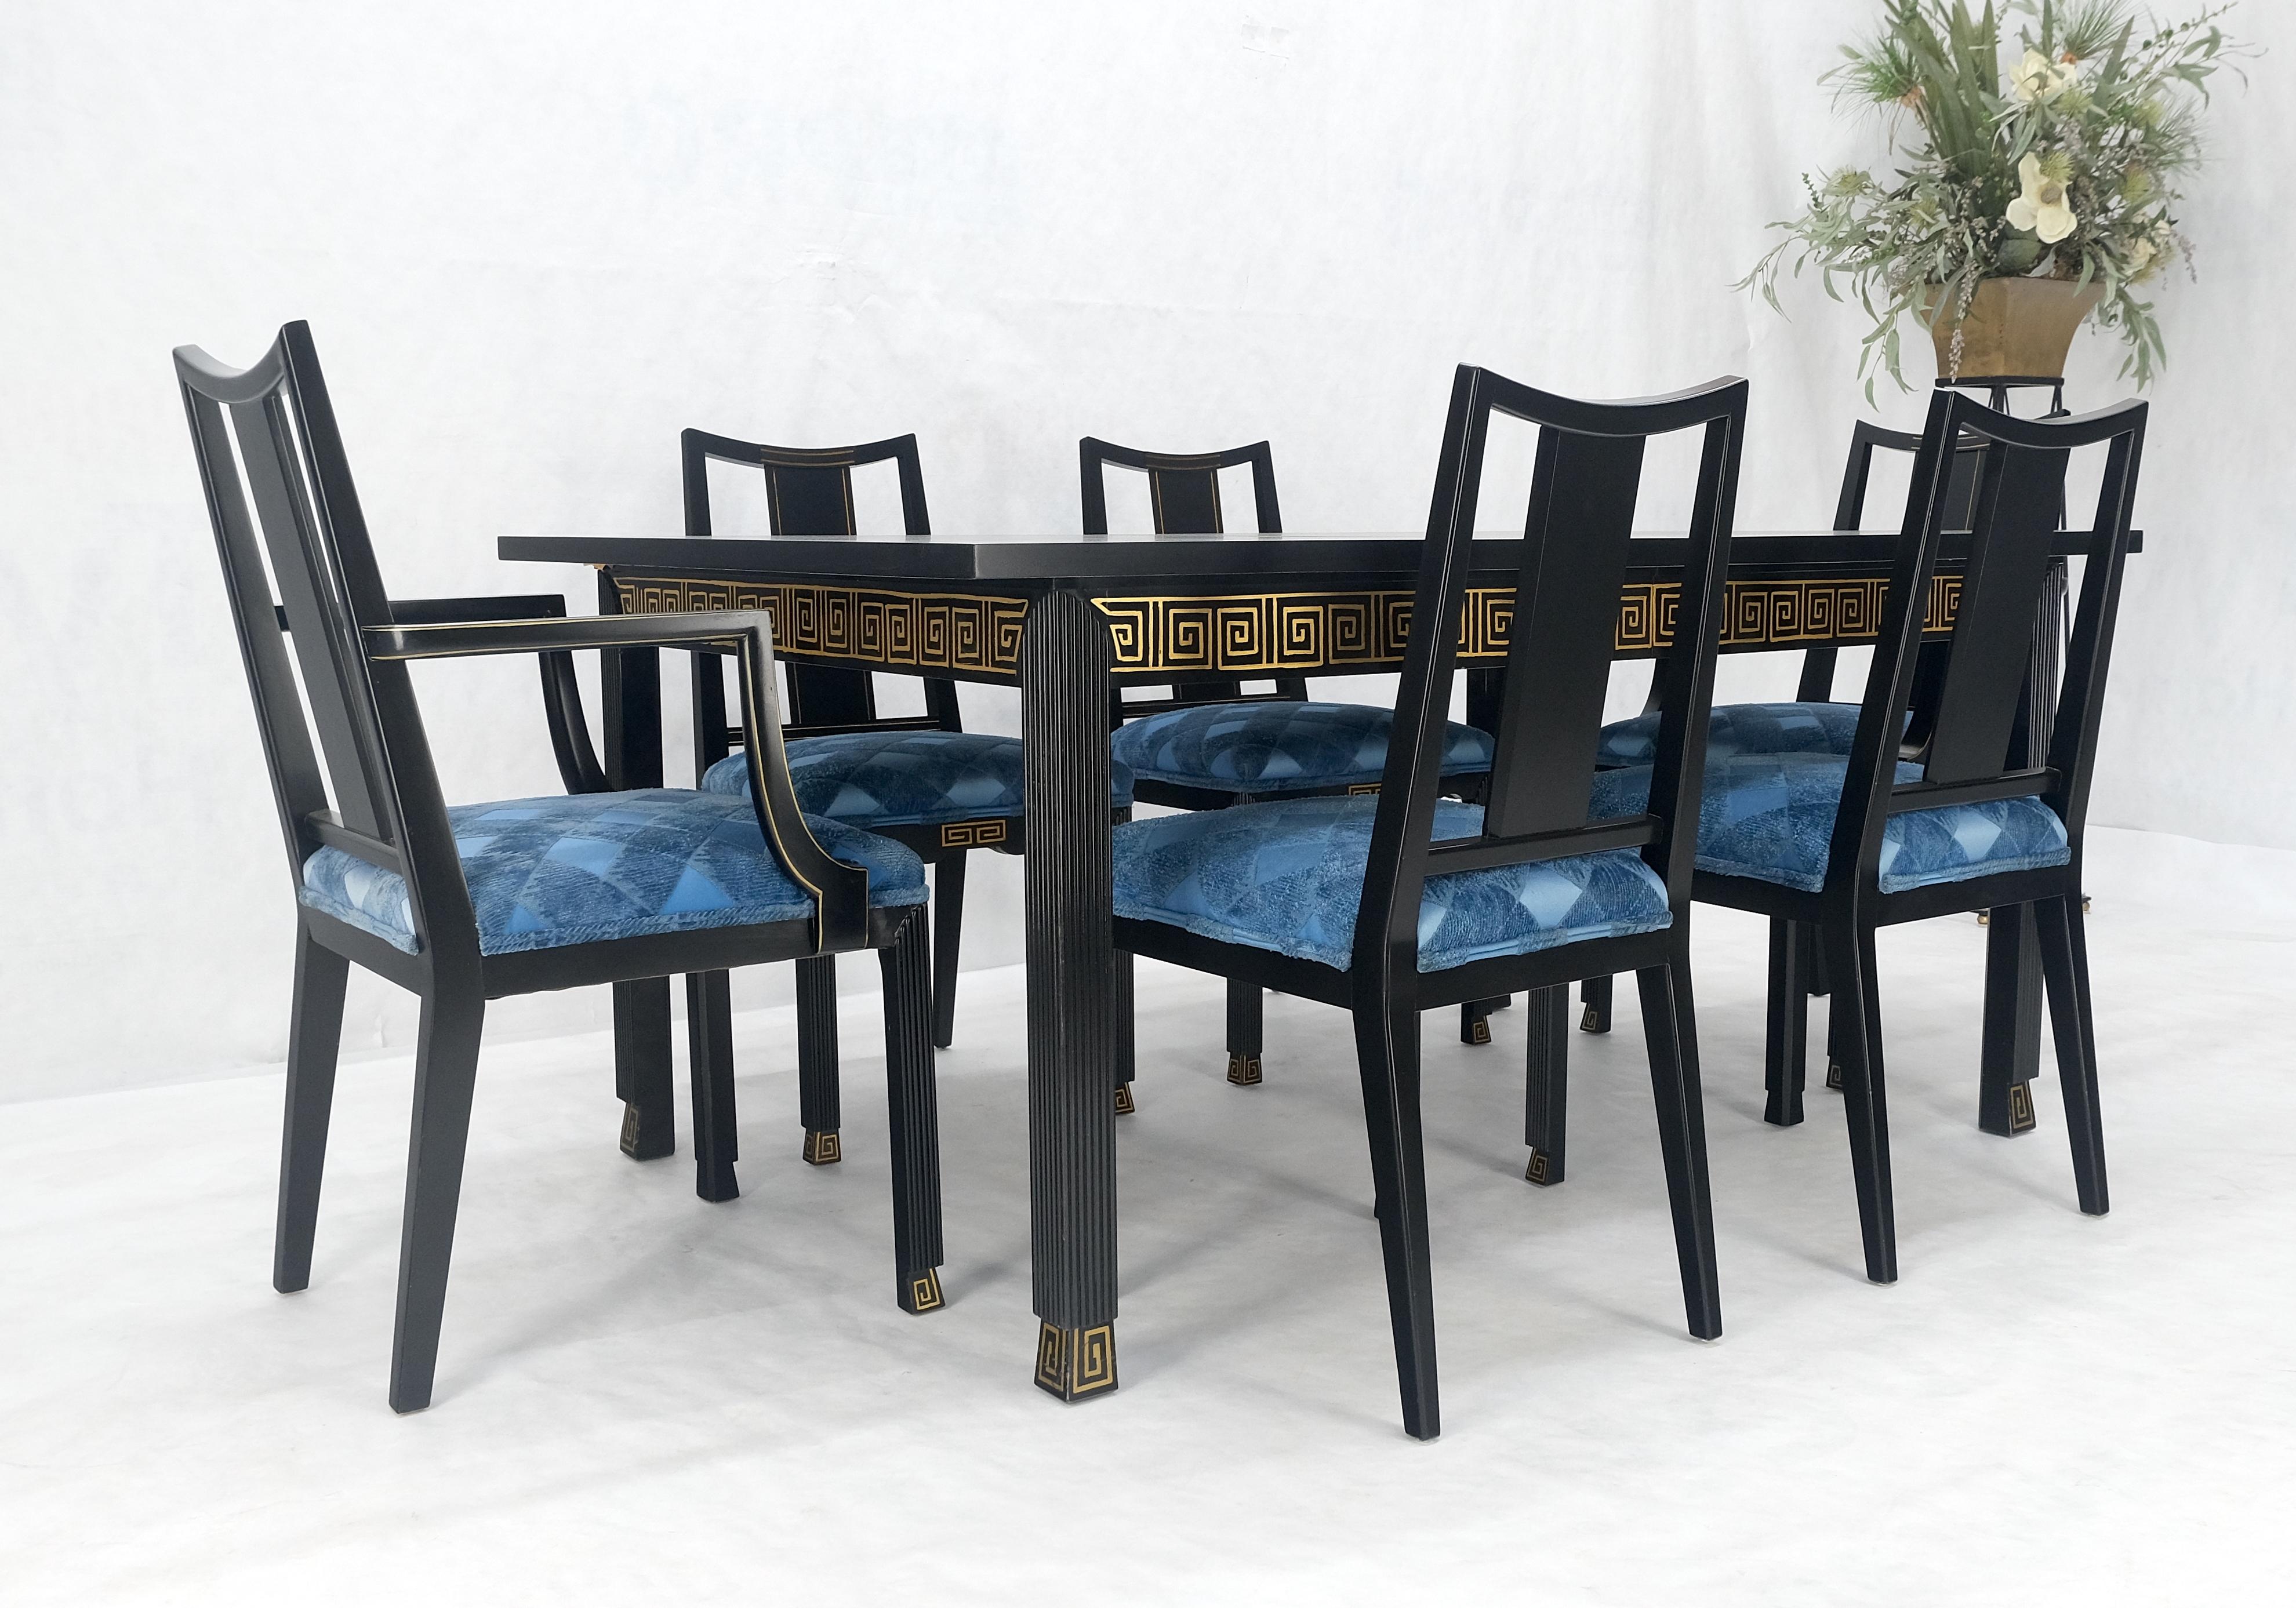 Black Lacquer Gold Ornament Decorated 6 Chairs 2 Leaves Dining Table Set MINT! For Sale 4